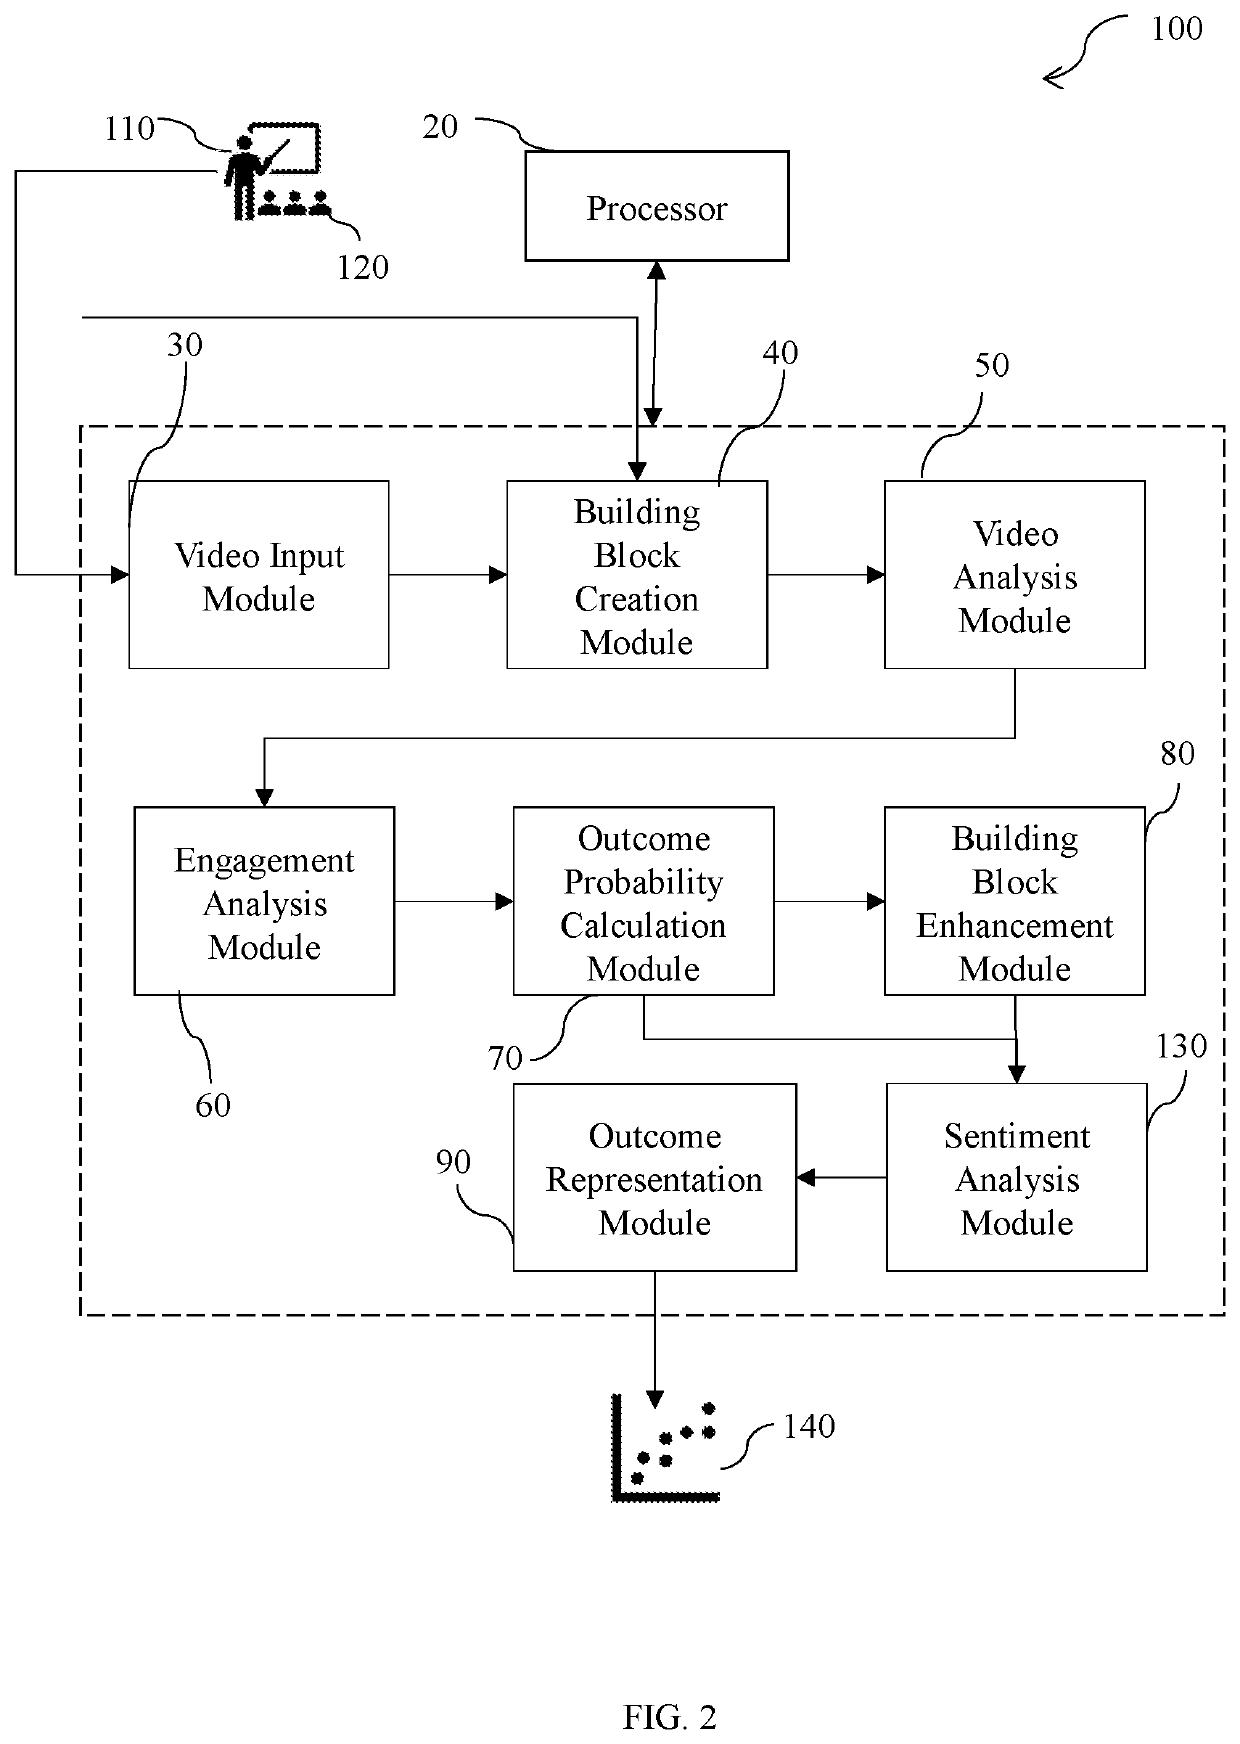 System and method to determine outcome probability of an event based on videos